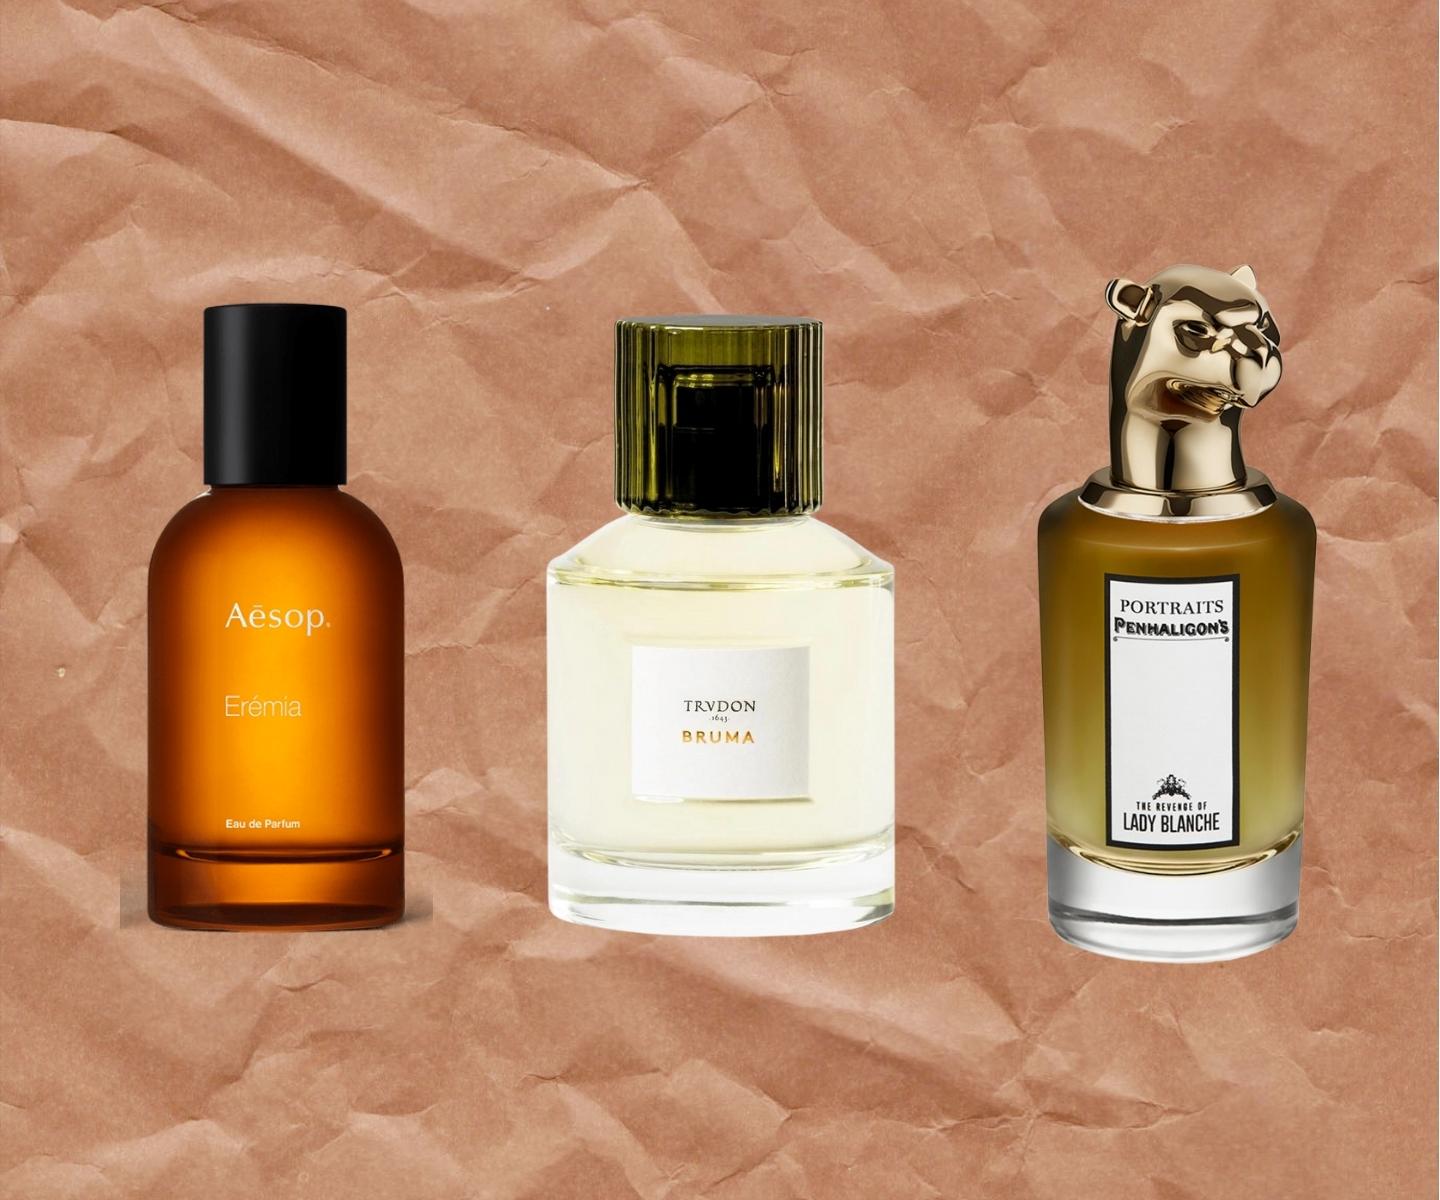 How to Use Fragrance Finder, the New Tool That Instantly Finds